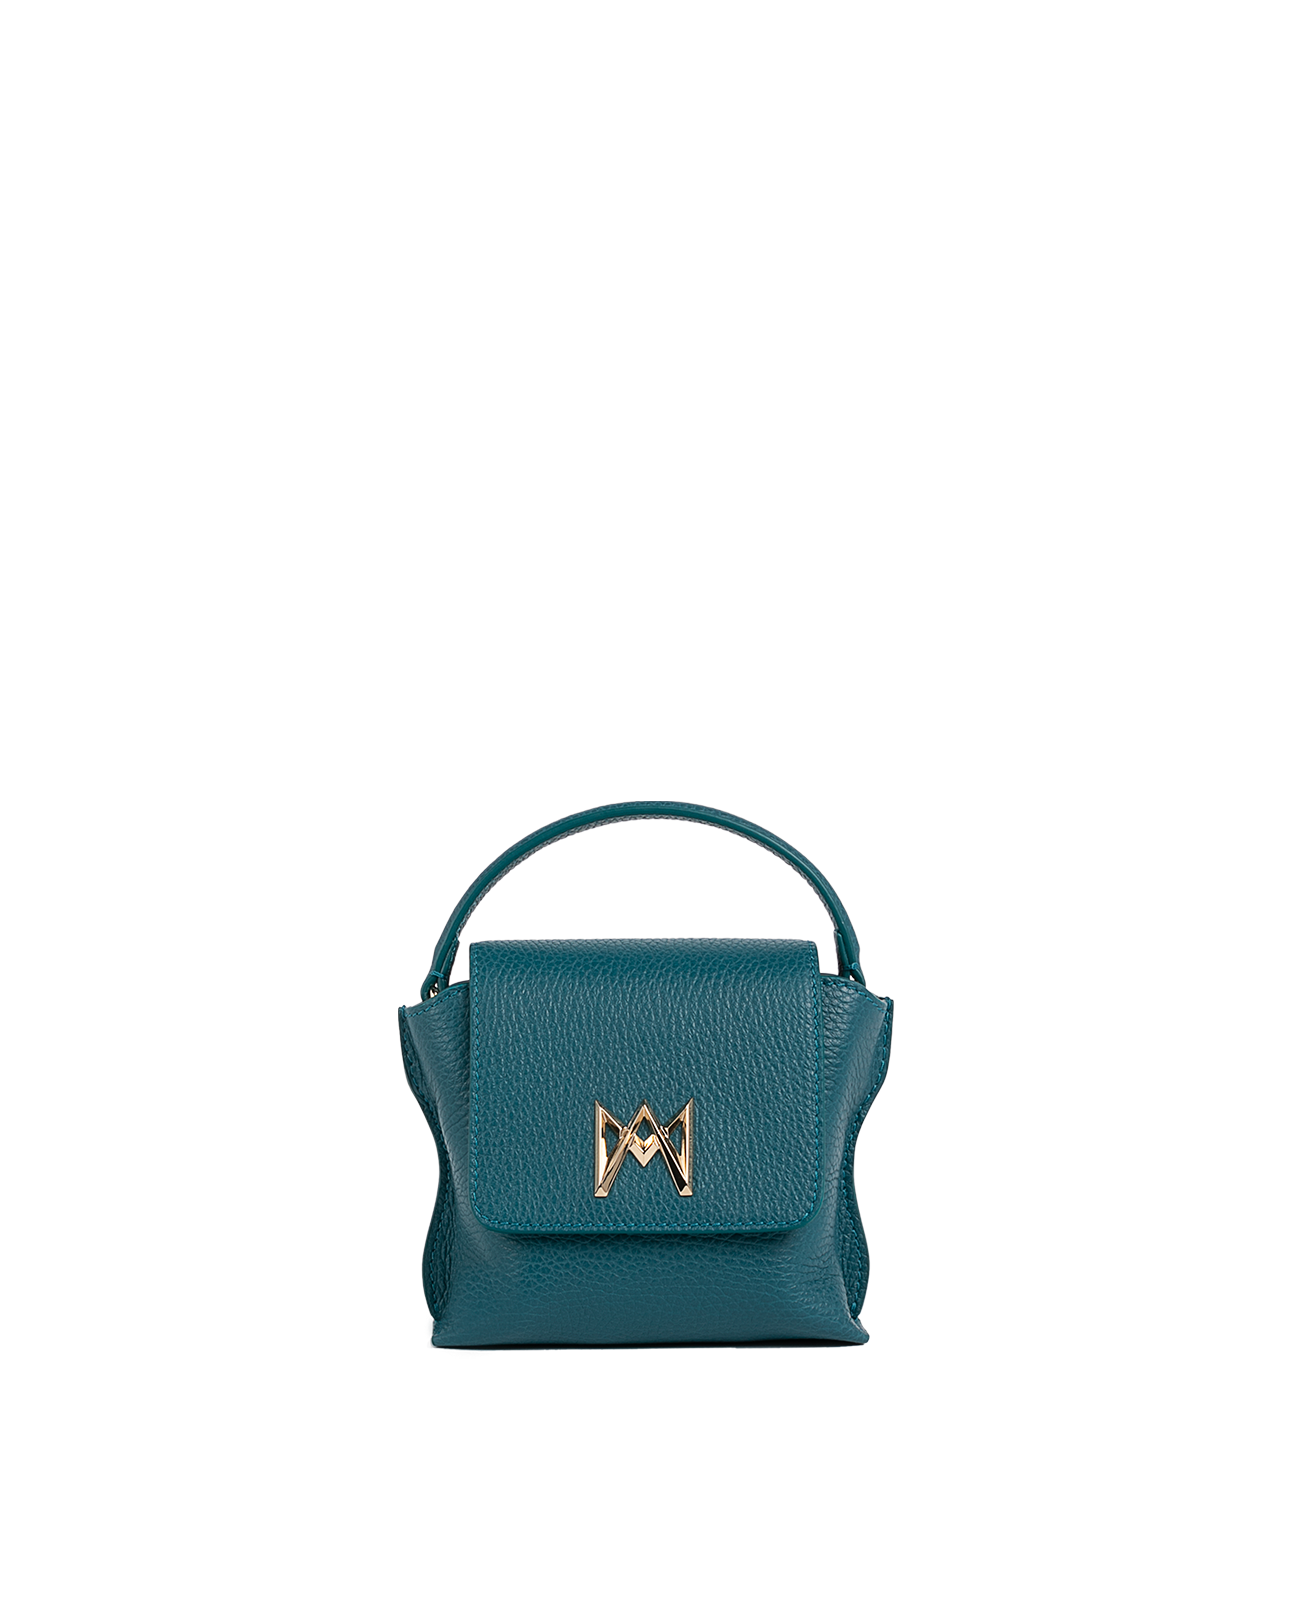 Cross-body bag in Italian full-grain leather, semi-aniline calf Italian leather with detachable shoulder strap.Three compartments, zip pocket in the back compartment. Magnetic flap closure with logo. Color: Teal. Size:Mini